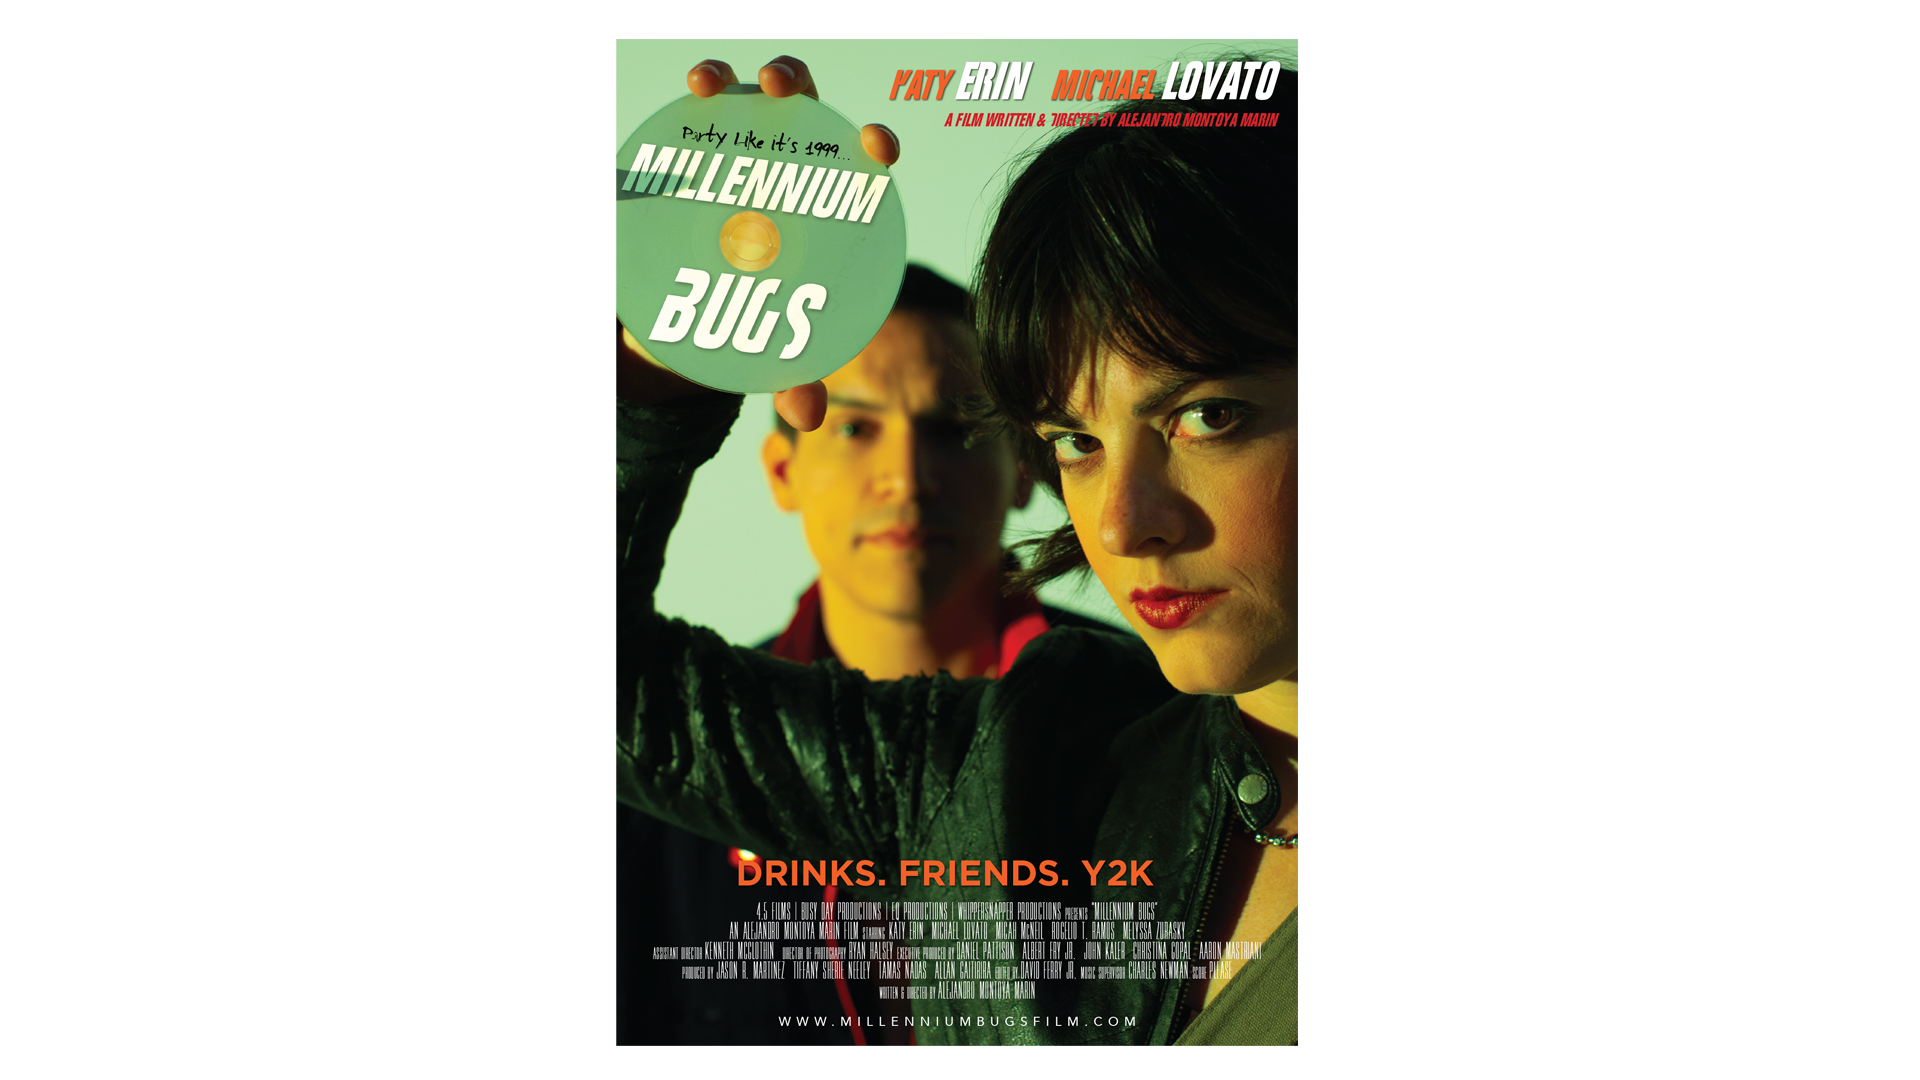 Millennium Bugs - FIGHT CLUB Variant one-sheet.png